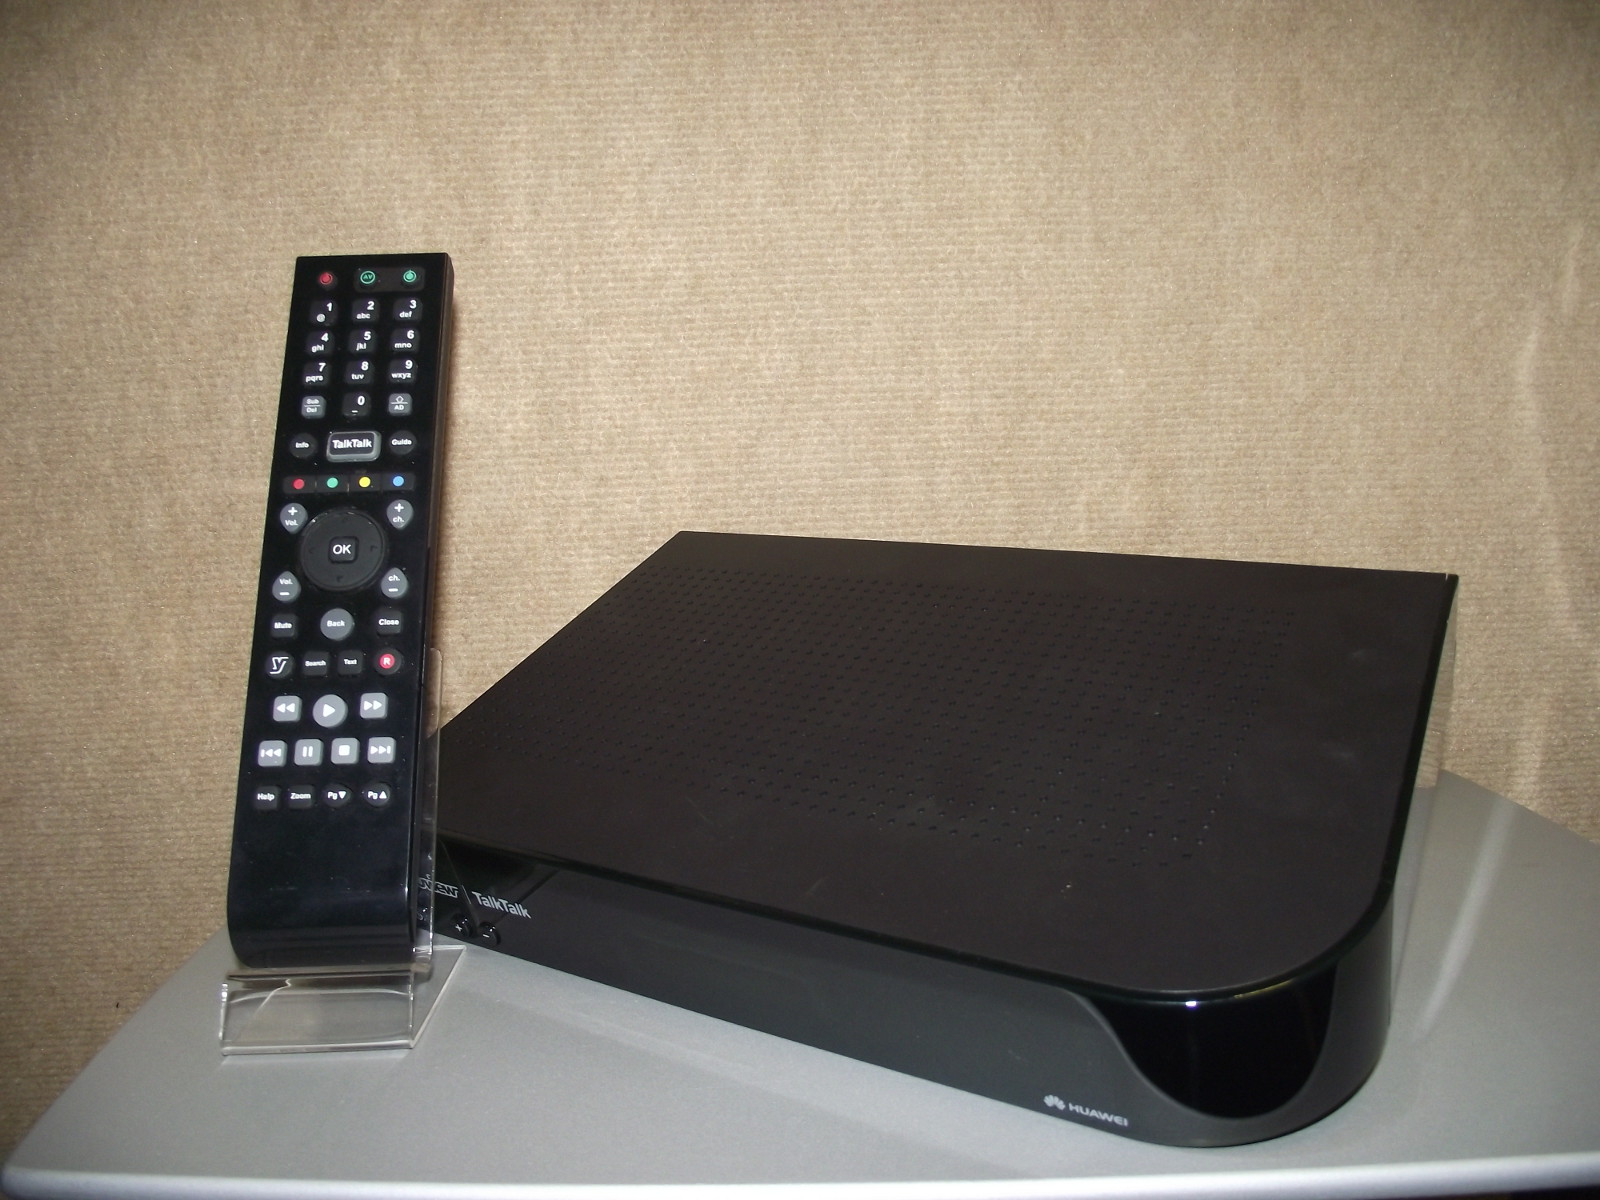 hack youview box